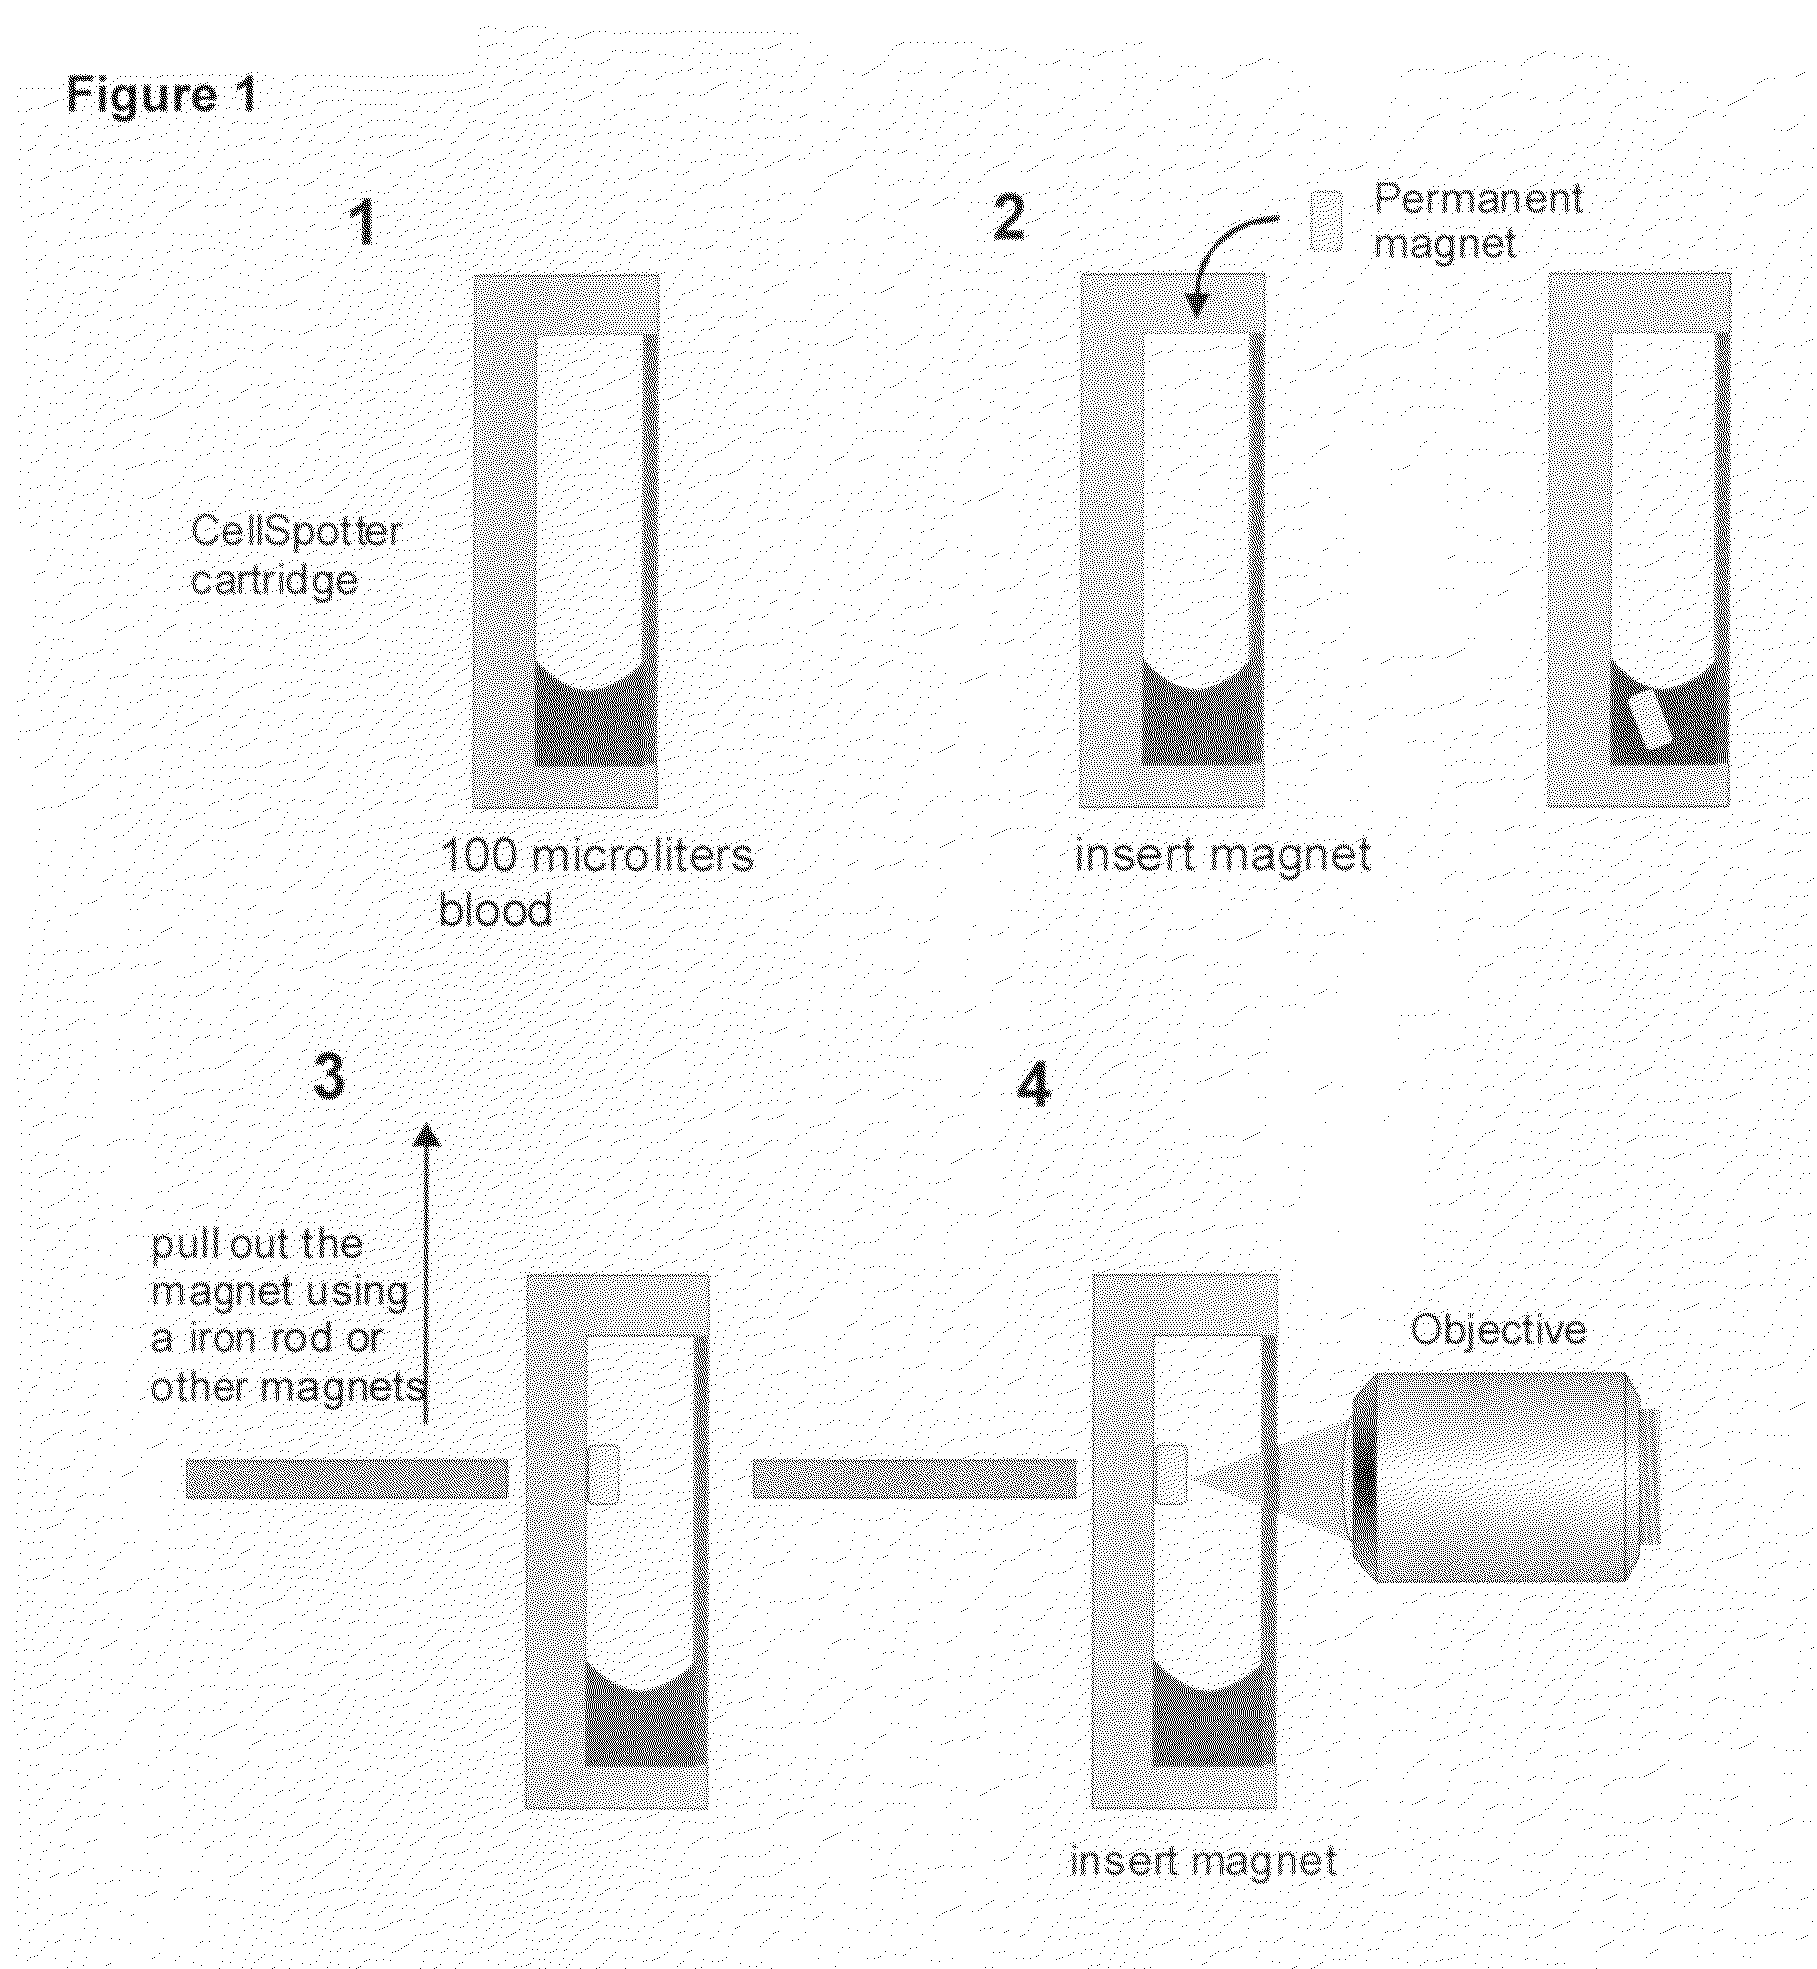 Method and apparatus for imaging target components in a biological sample using permanent magnets